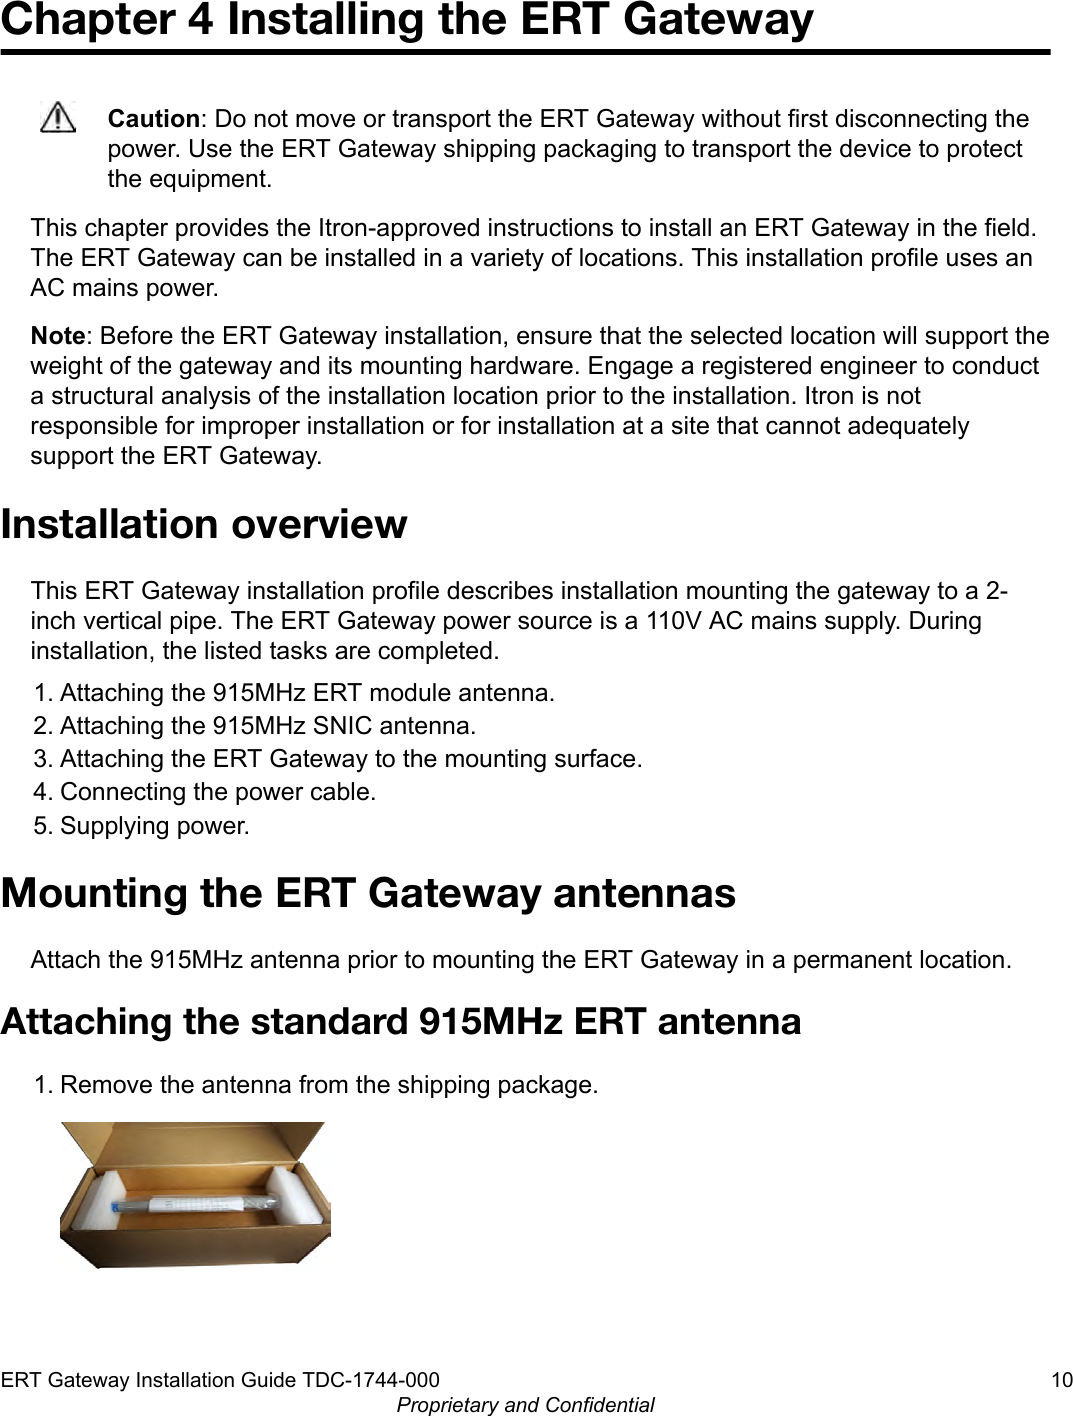 Chapter 4 Installing the ERT GatewayCaution: Do not move or transport the ERT Gateway without first disconnecting thepower. Use the ERT Gateway shipping packaging to transport the device to protectthe equipment.This chapter provides the Itron-approved instructions to install an ERT Gateway in the field.The ERT Gateway can be installed in a variety of locations. This installation profile uses anAC mains power.Note: Before the ERT Gateway installation, ensure that the selected location will support theweight of the gateway and its mounting hardware. Engage a registered engineer to conducta structural analysis of the installation location prior to the installation. Itron is notresponsible for improper installation or for installation at a site that cannot adequatelysupport the ERT Gateway.Installation overviewThis ERT Gateway installation profile describes installation mounting the gateway to a 2-inch vertical pipe. The ERT Gateway power source is a 110V AC mains supply. Duringinstallation, the listed tasks are completed.1. Attaching the 915MHz ERT module antenna.2. Attaching the 915MHz SNIC antenna.3. Attaching the ERT Gateway to the mounting surface.4. Connecting the power cable.5. Supplying power.Mounting the ERT Gateway antennasAttach the 915MHz antenna prior to mounting the ERT Gateway in a permanent location.Attaching the standard 915MHz ERT antenna1. Remove the antenna from the shipping package.ERT Gateway Installation Guide TDC-1744-000 10Proprietary and Confidential